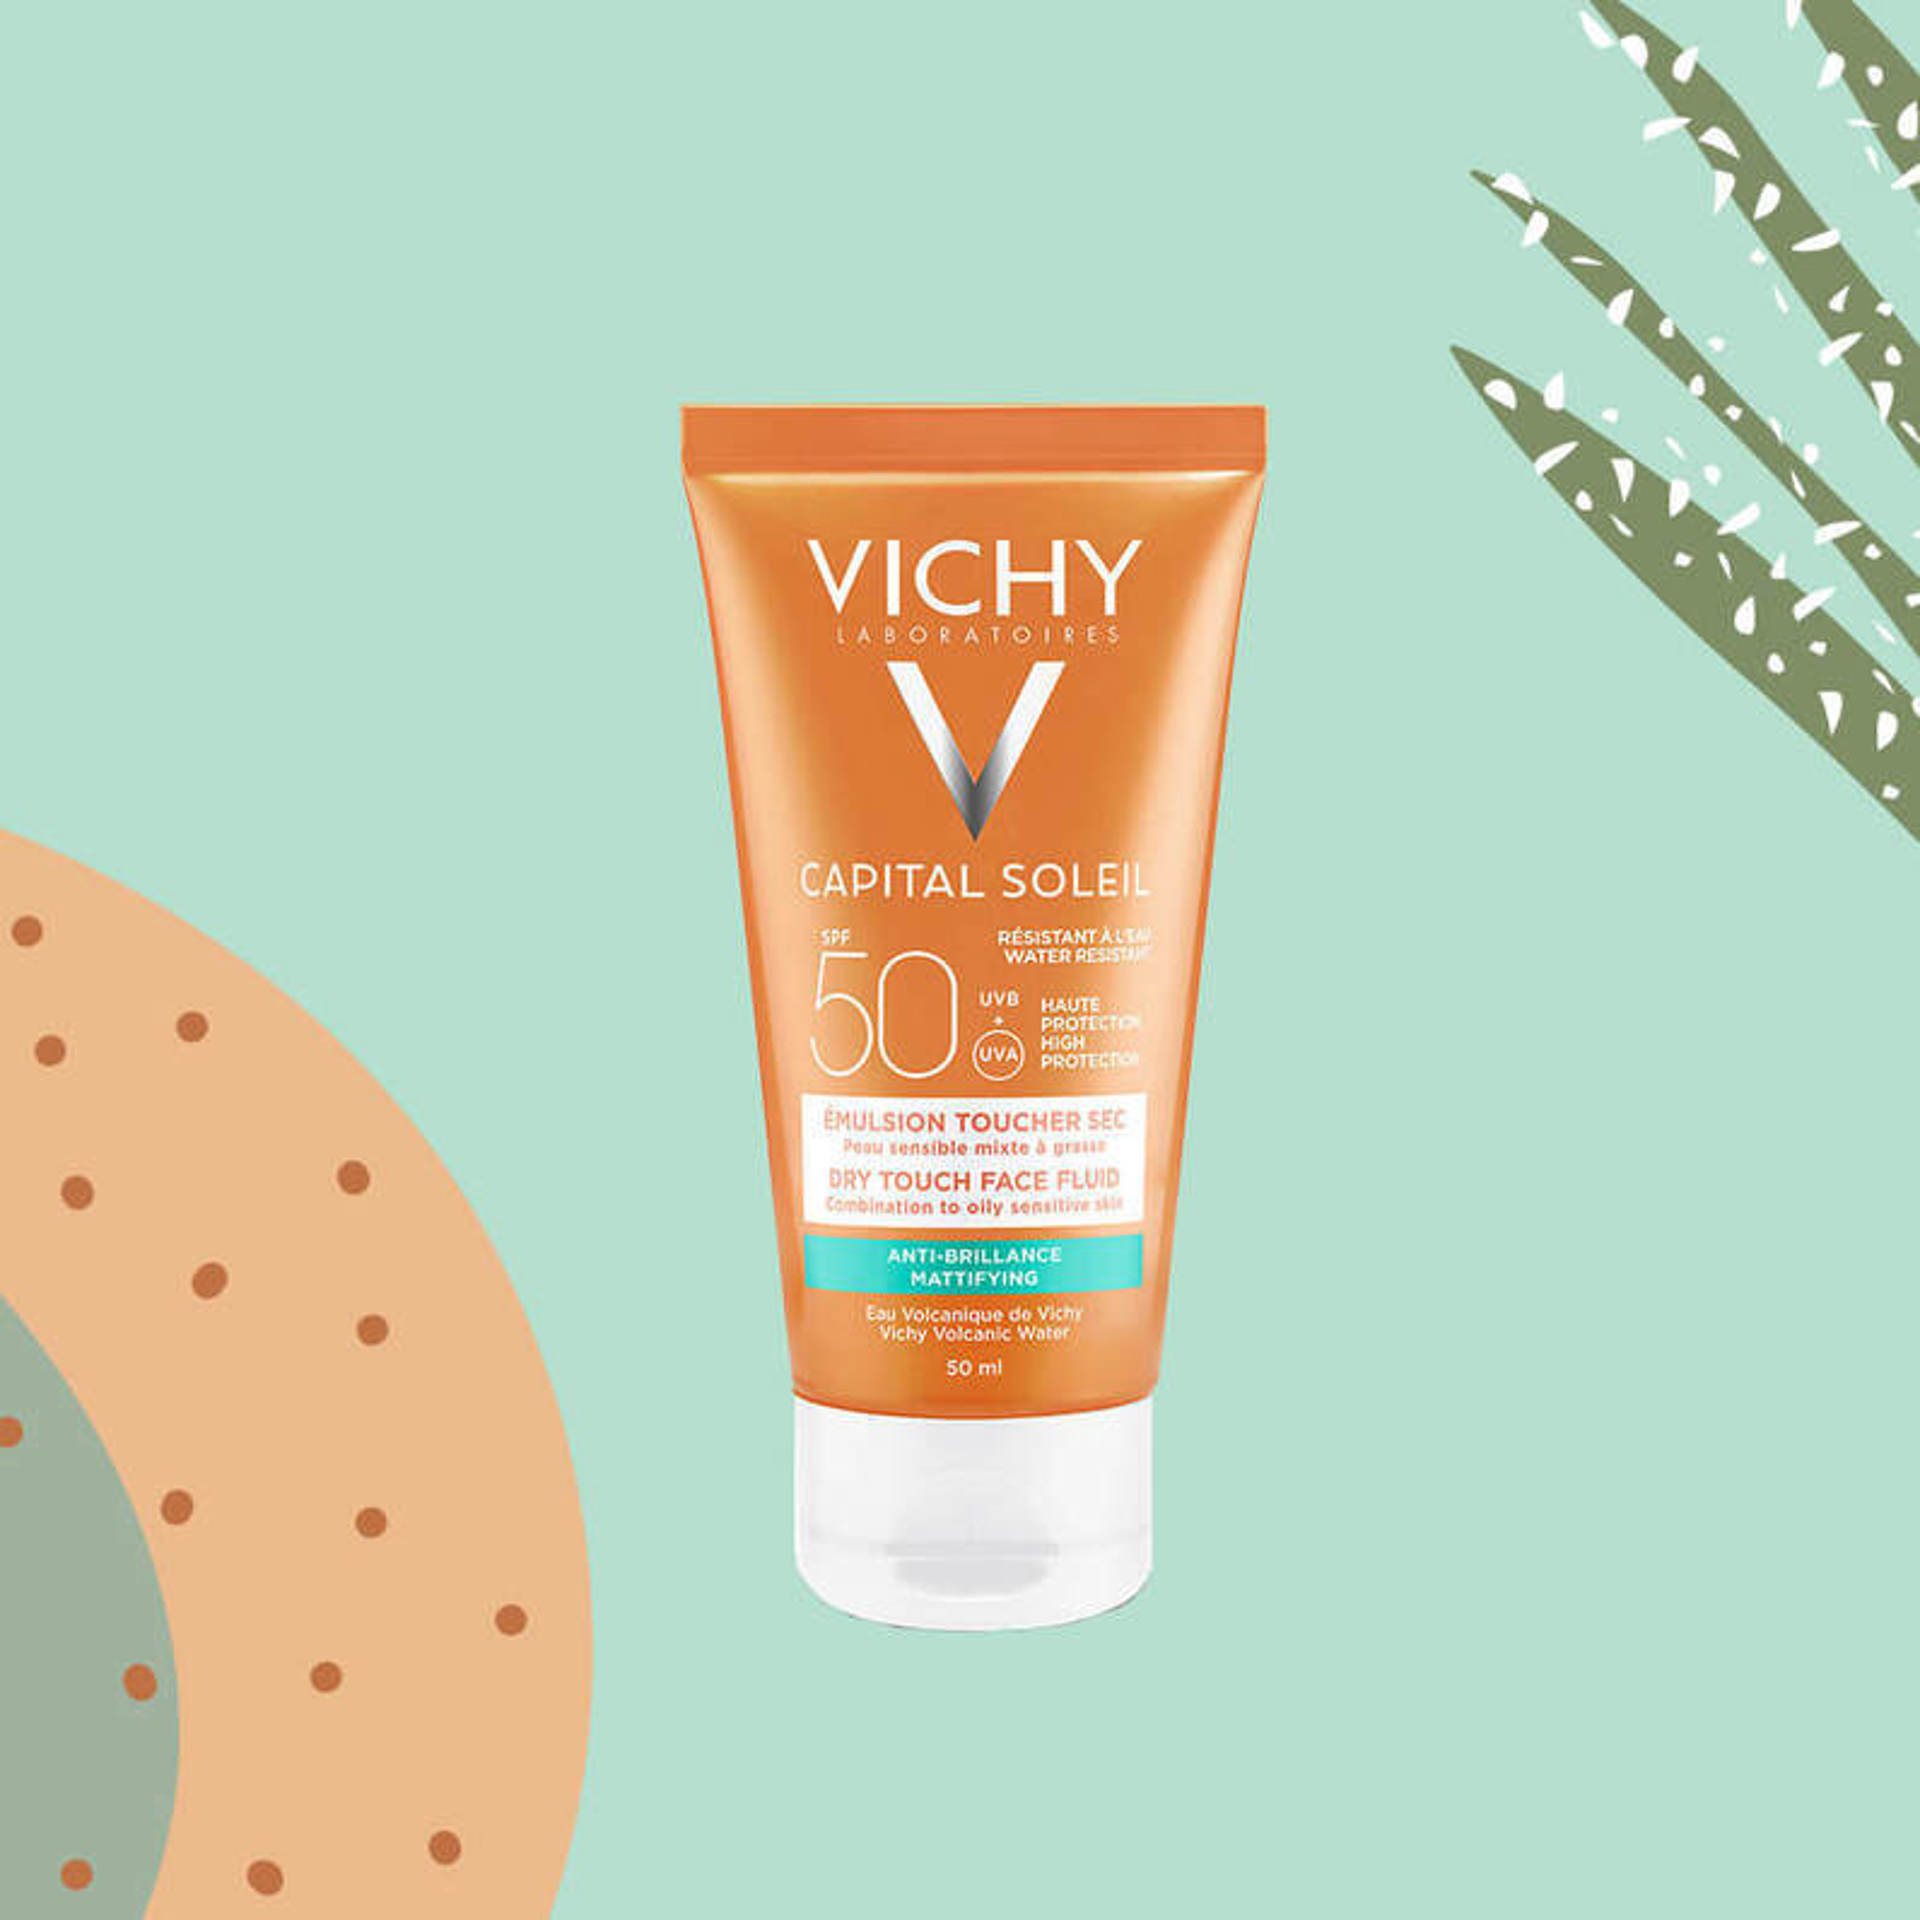 Vichy Capital Soleil Dry Touch SPF 50+